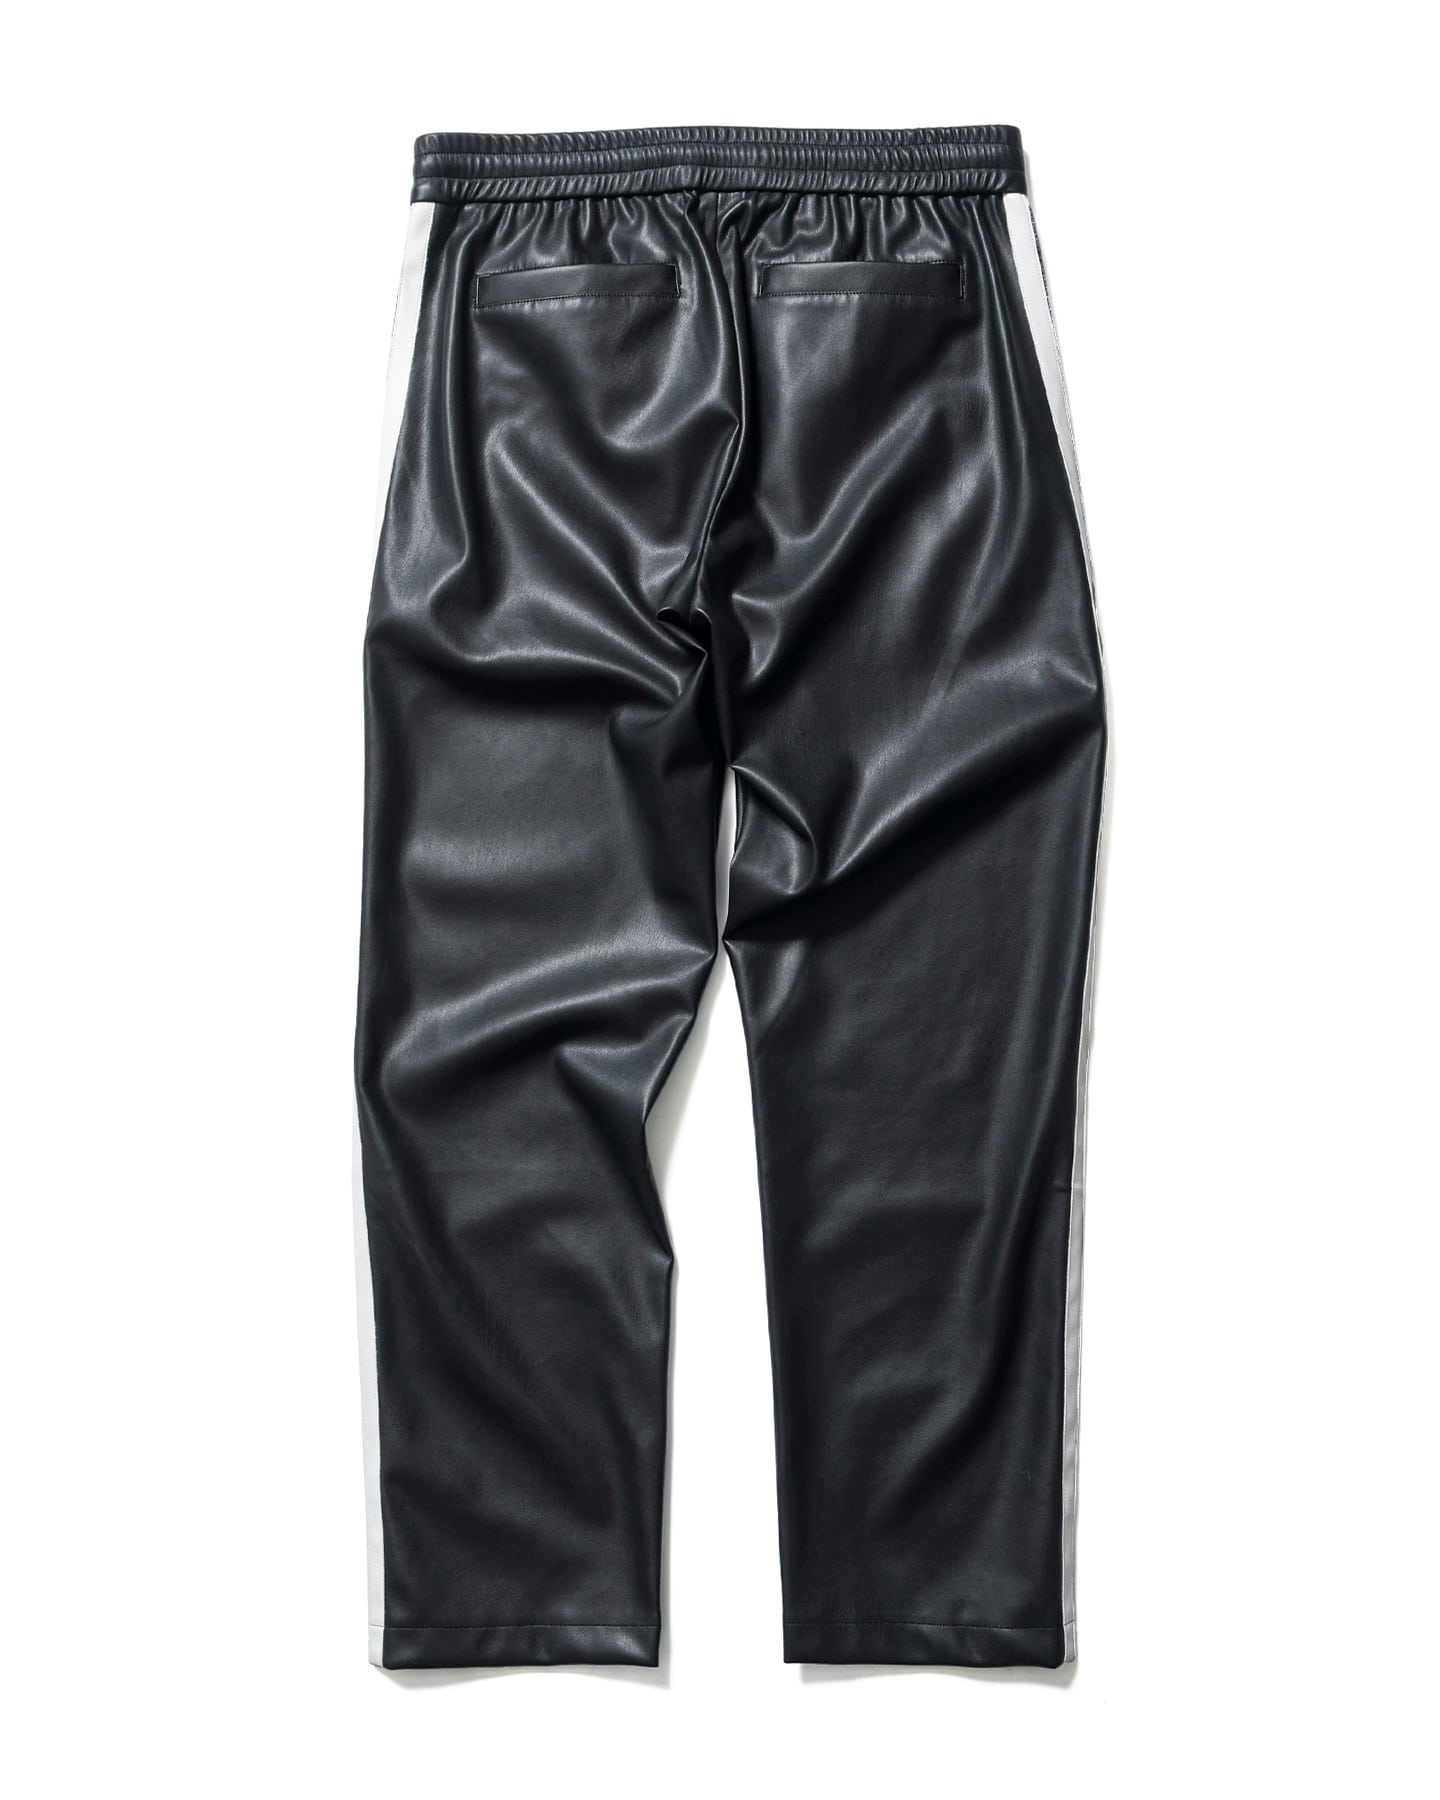 SOPH. | SYNTHETIC LEATHER PANTS(L BLACK):